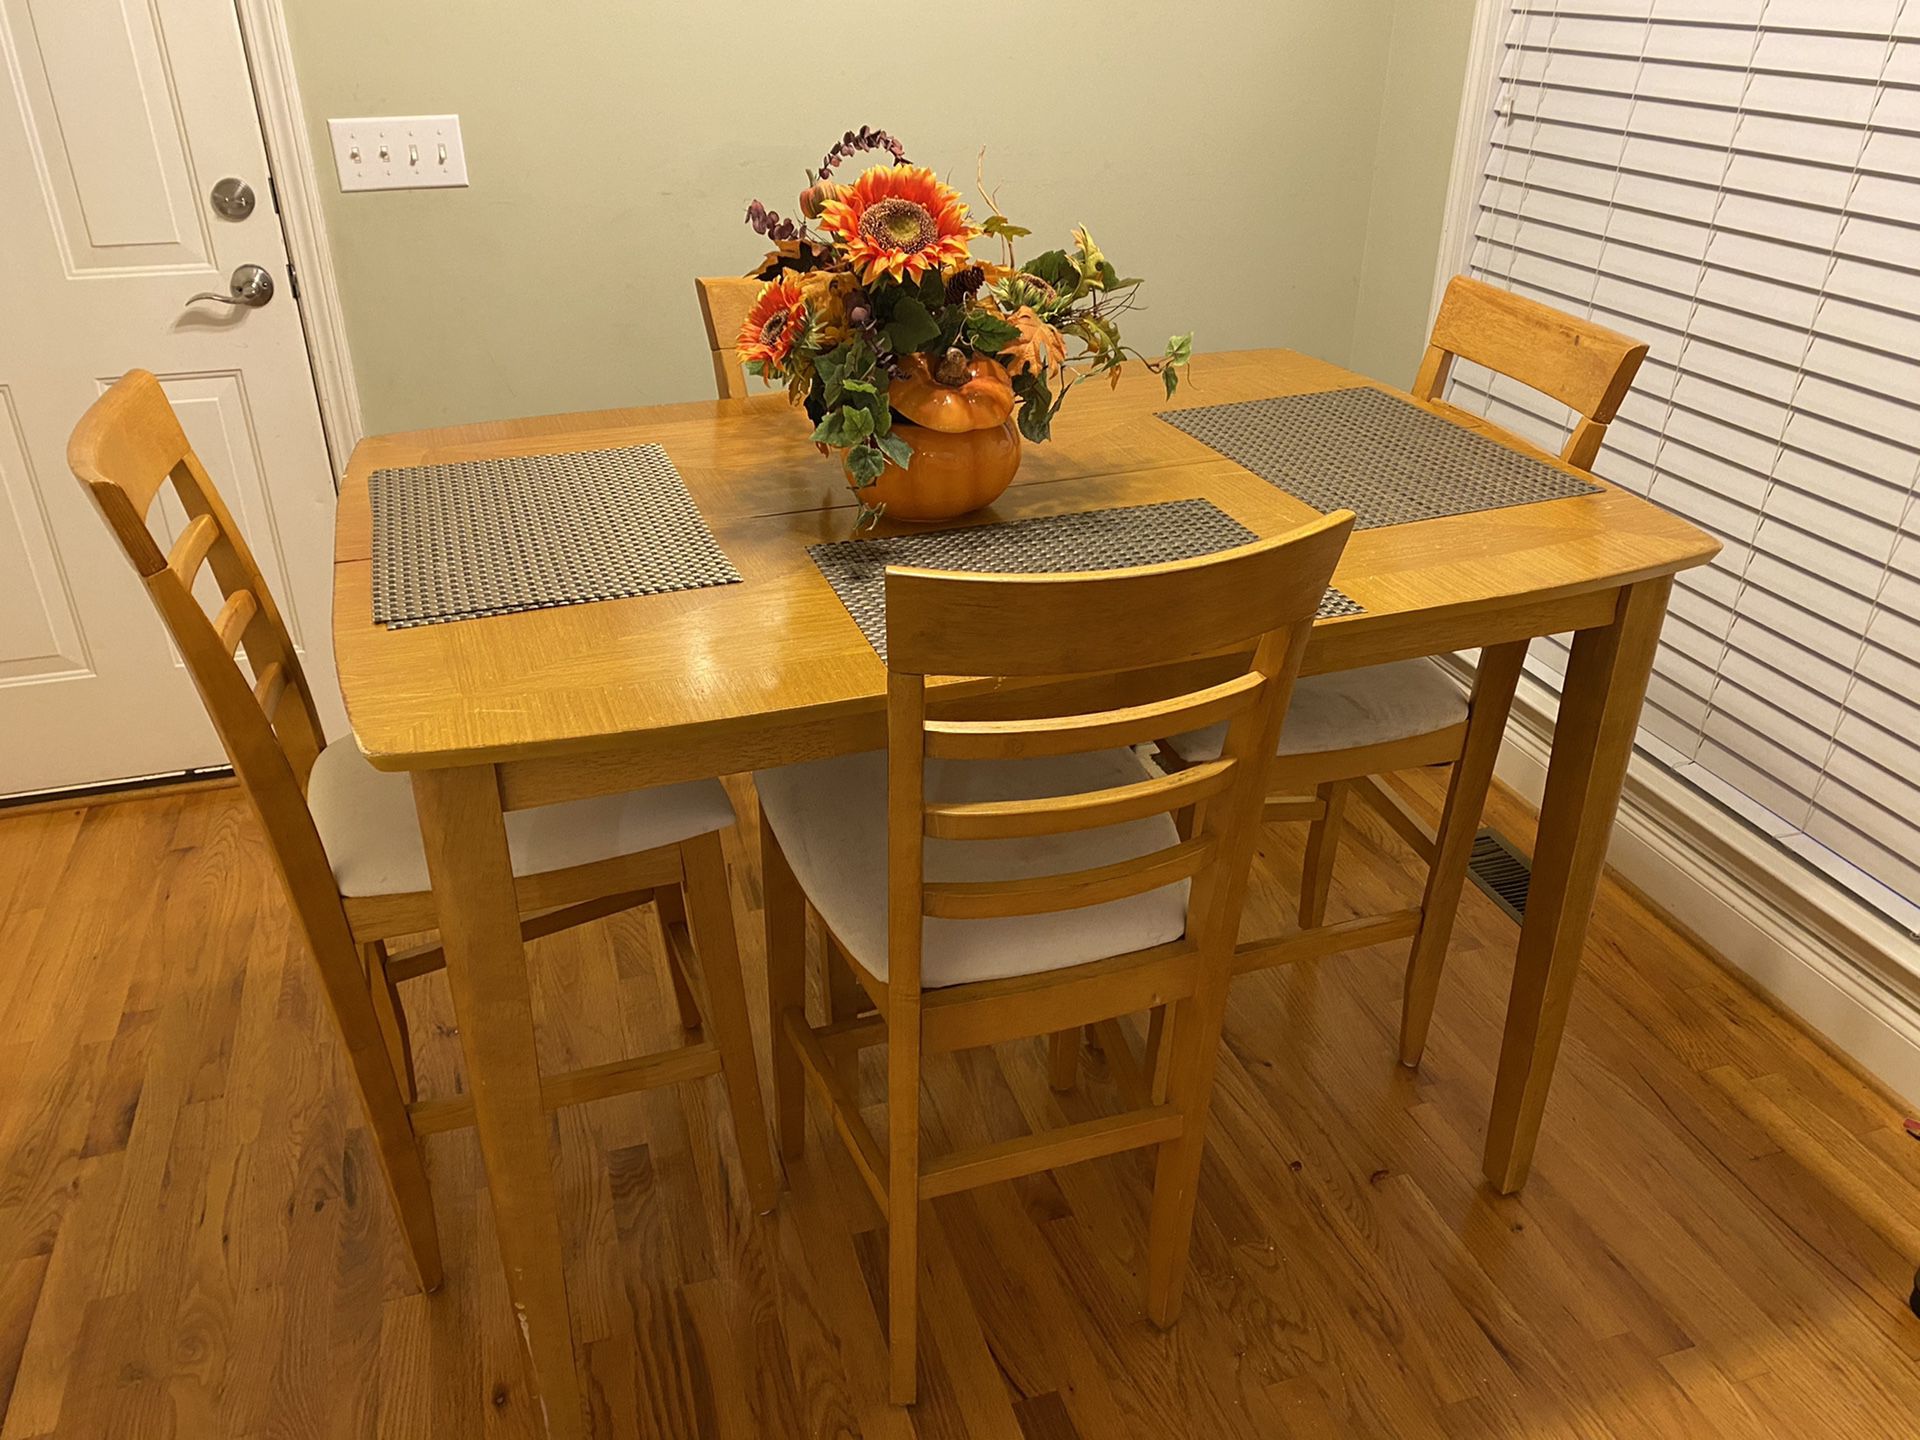 Breakfast dining set - table and chairs